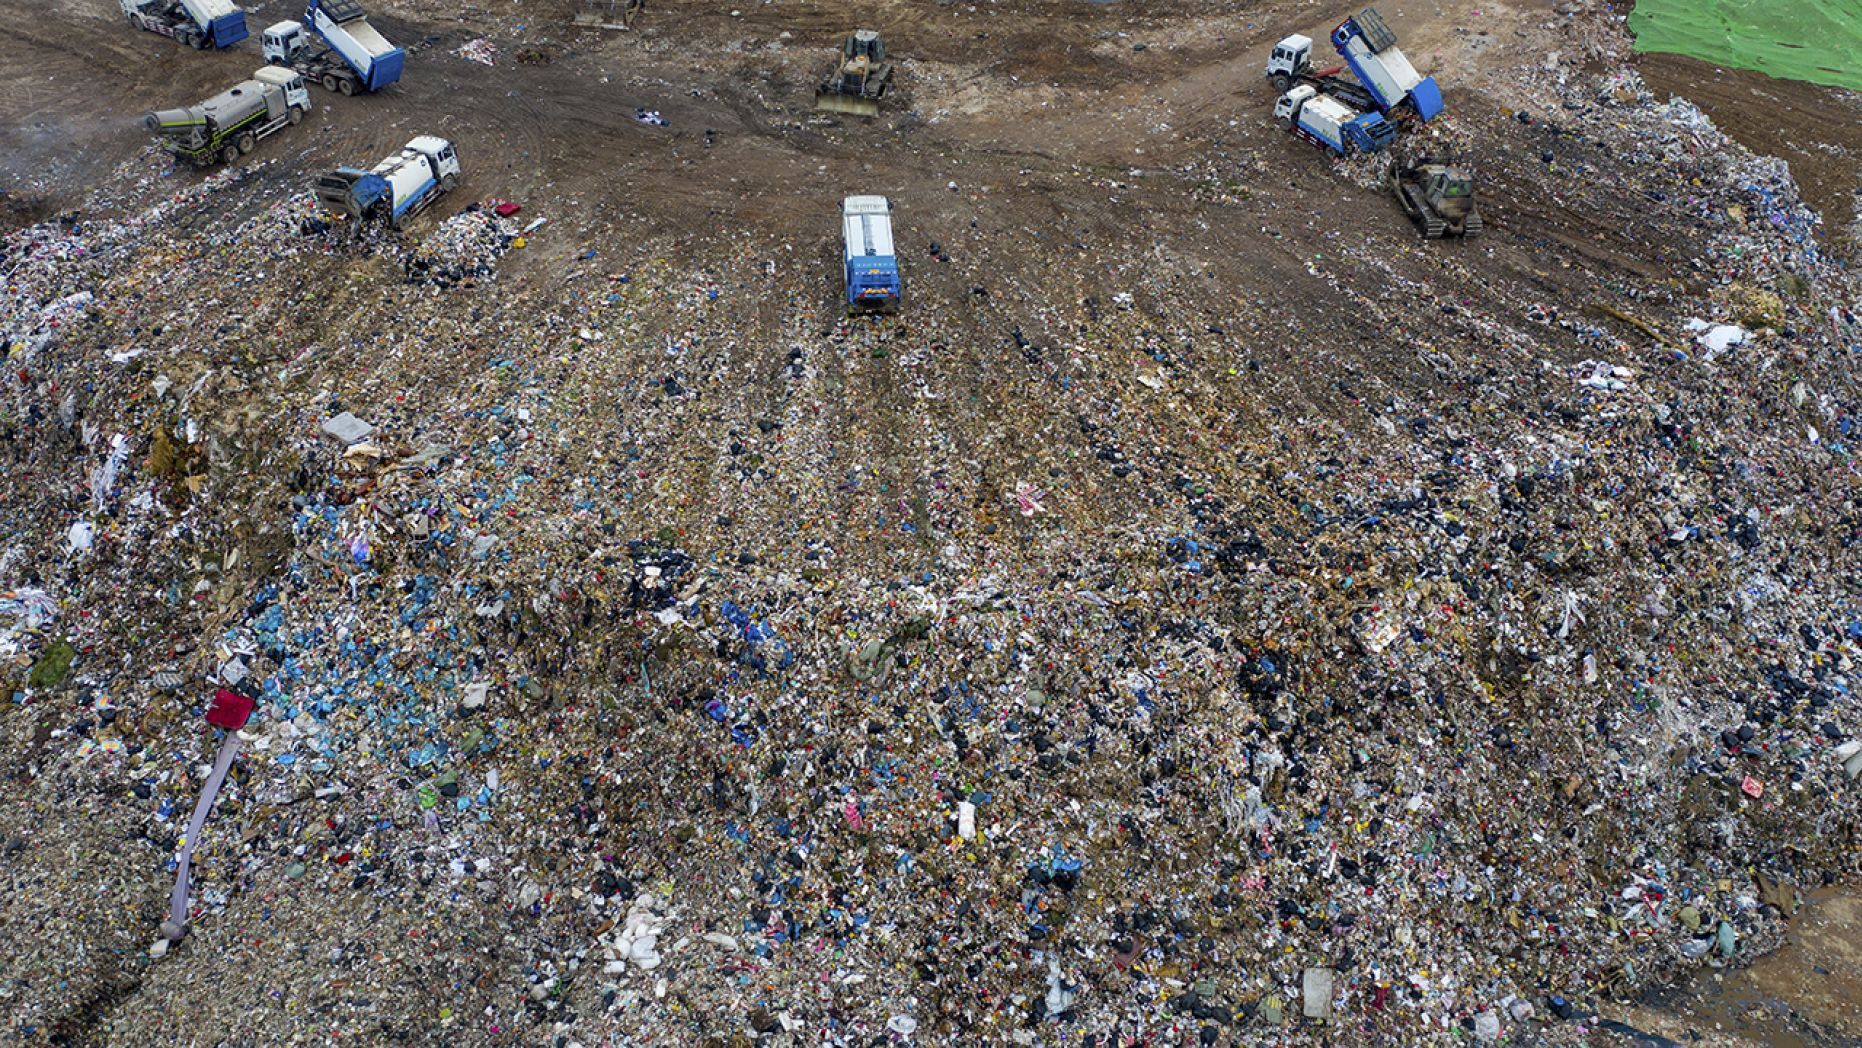 Chinese workers sort out and bury kitchen waste at the Jiangcungou Landfill, which is the China's largest refuse landfill, in Xi'an city, northwest China's Shaanxi province, 21 August 2019.